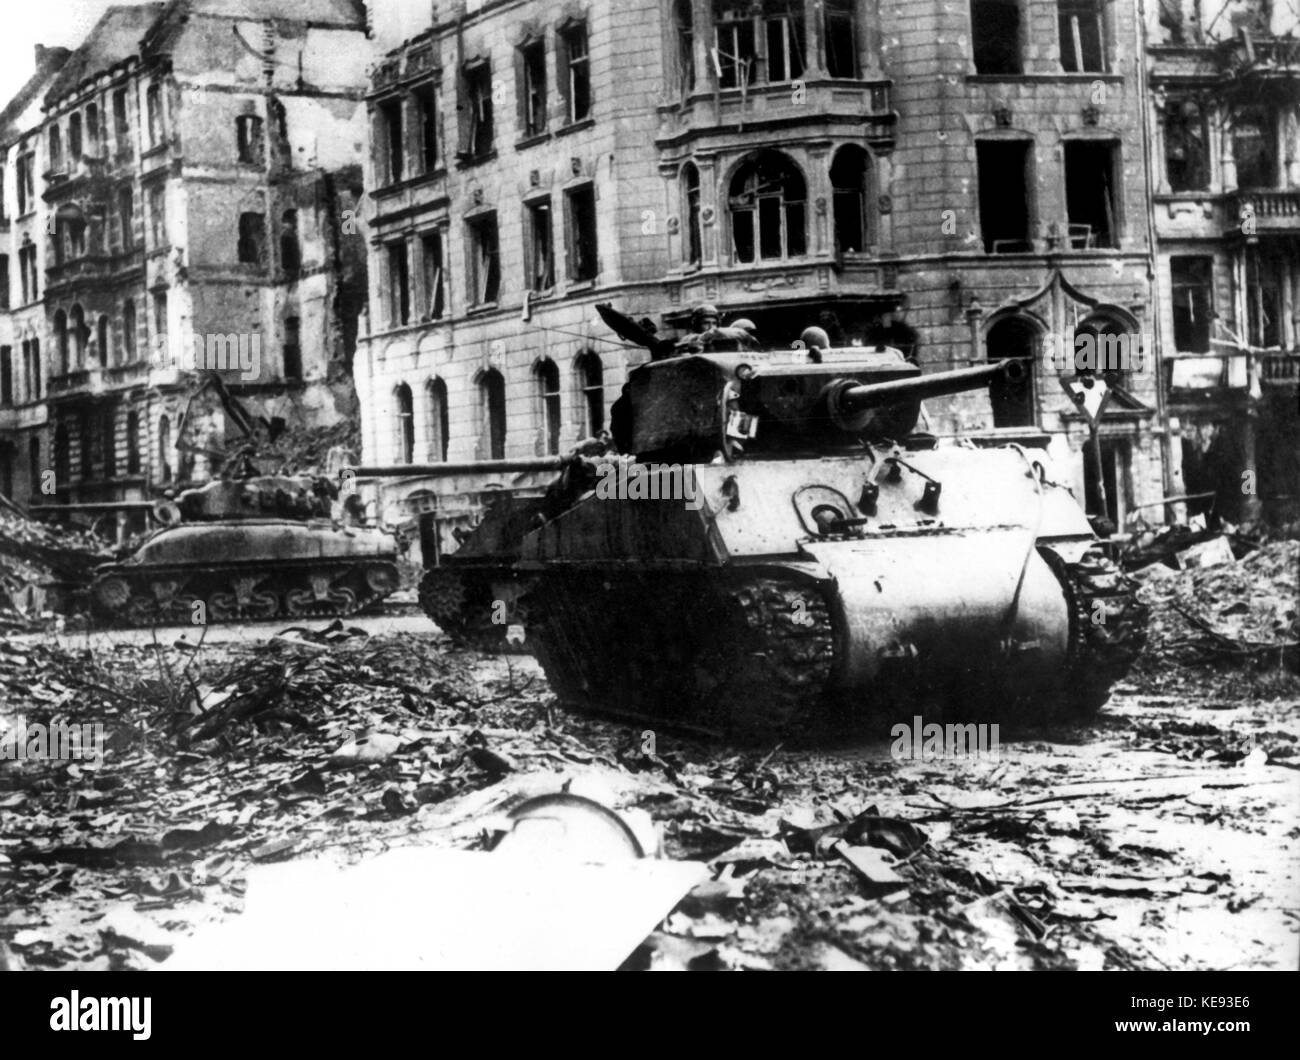 03-06-1945 Invasion of the American troops into the cathedral city of Cologne. May 8th, 1945, the Second World War ends with the capitulation of Germany. | usage worldwide Stock Photo